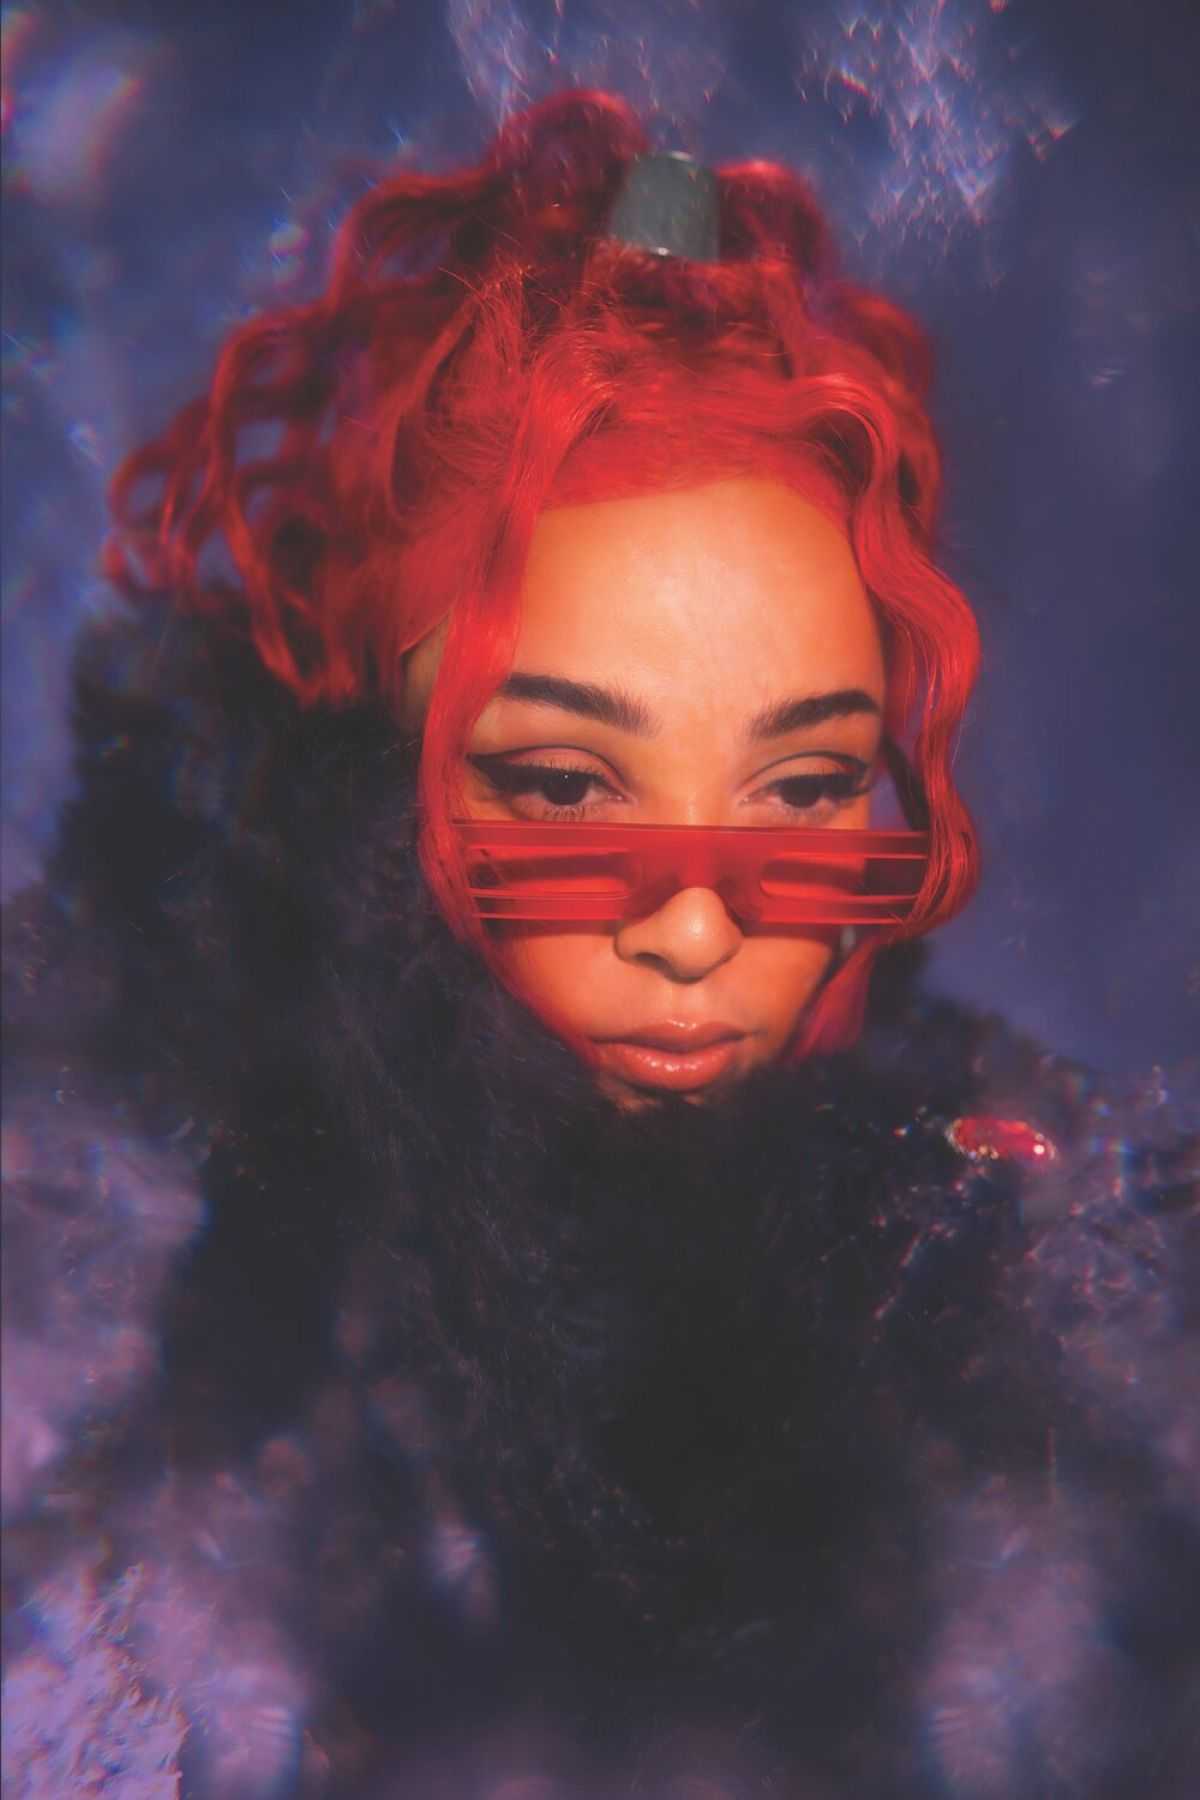 A woman with red hair and red sunglasses. - Doja Cat